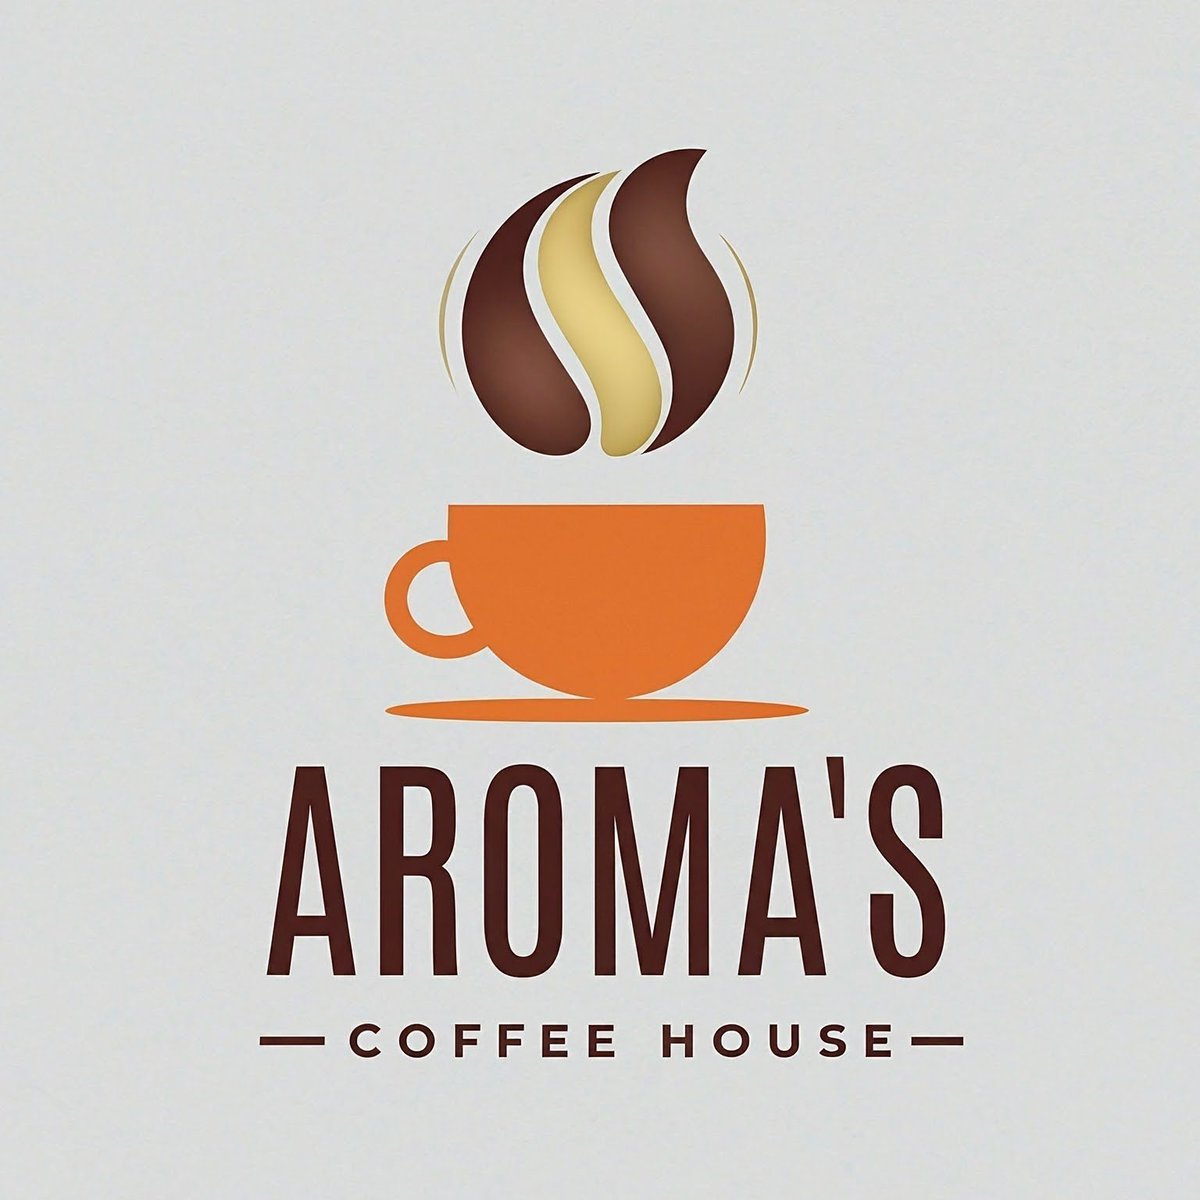 📜 MJ vs DALL-E vs Google Search (SGE) Image Gen ✍️Flat vector illustration of a company logo, use the color palette of Brown, Orange and Gold with text 'Aroma's Coffee House', I used the above prompt in MJ, DALL-E and Google Search. Check ALT to know the rendering engine.